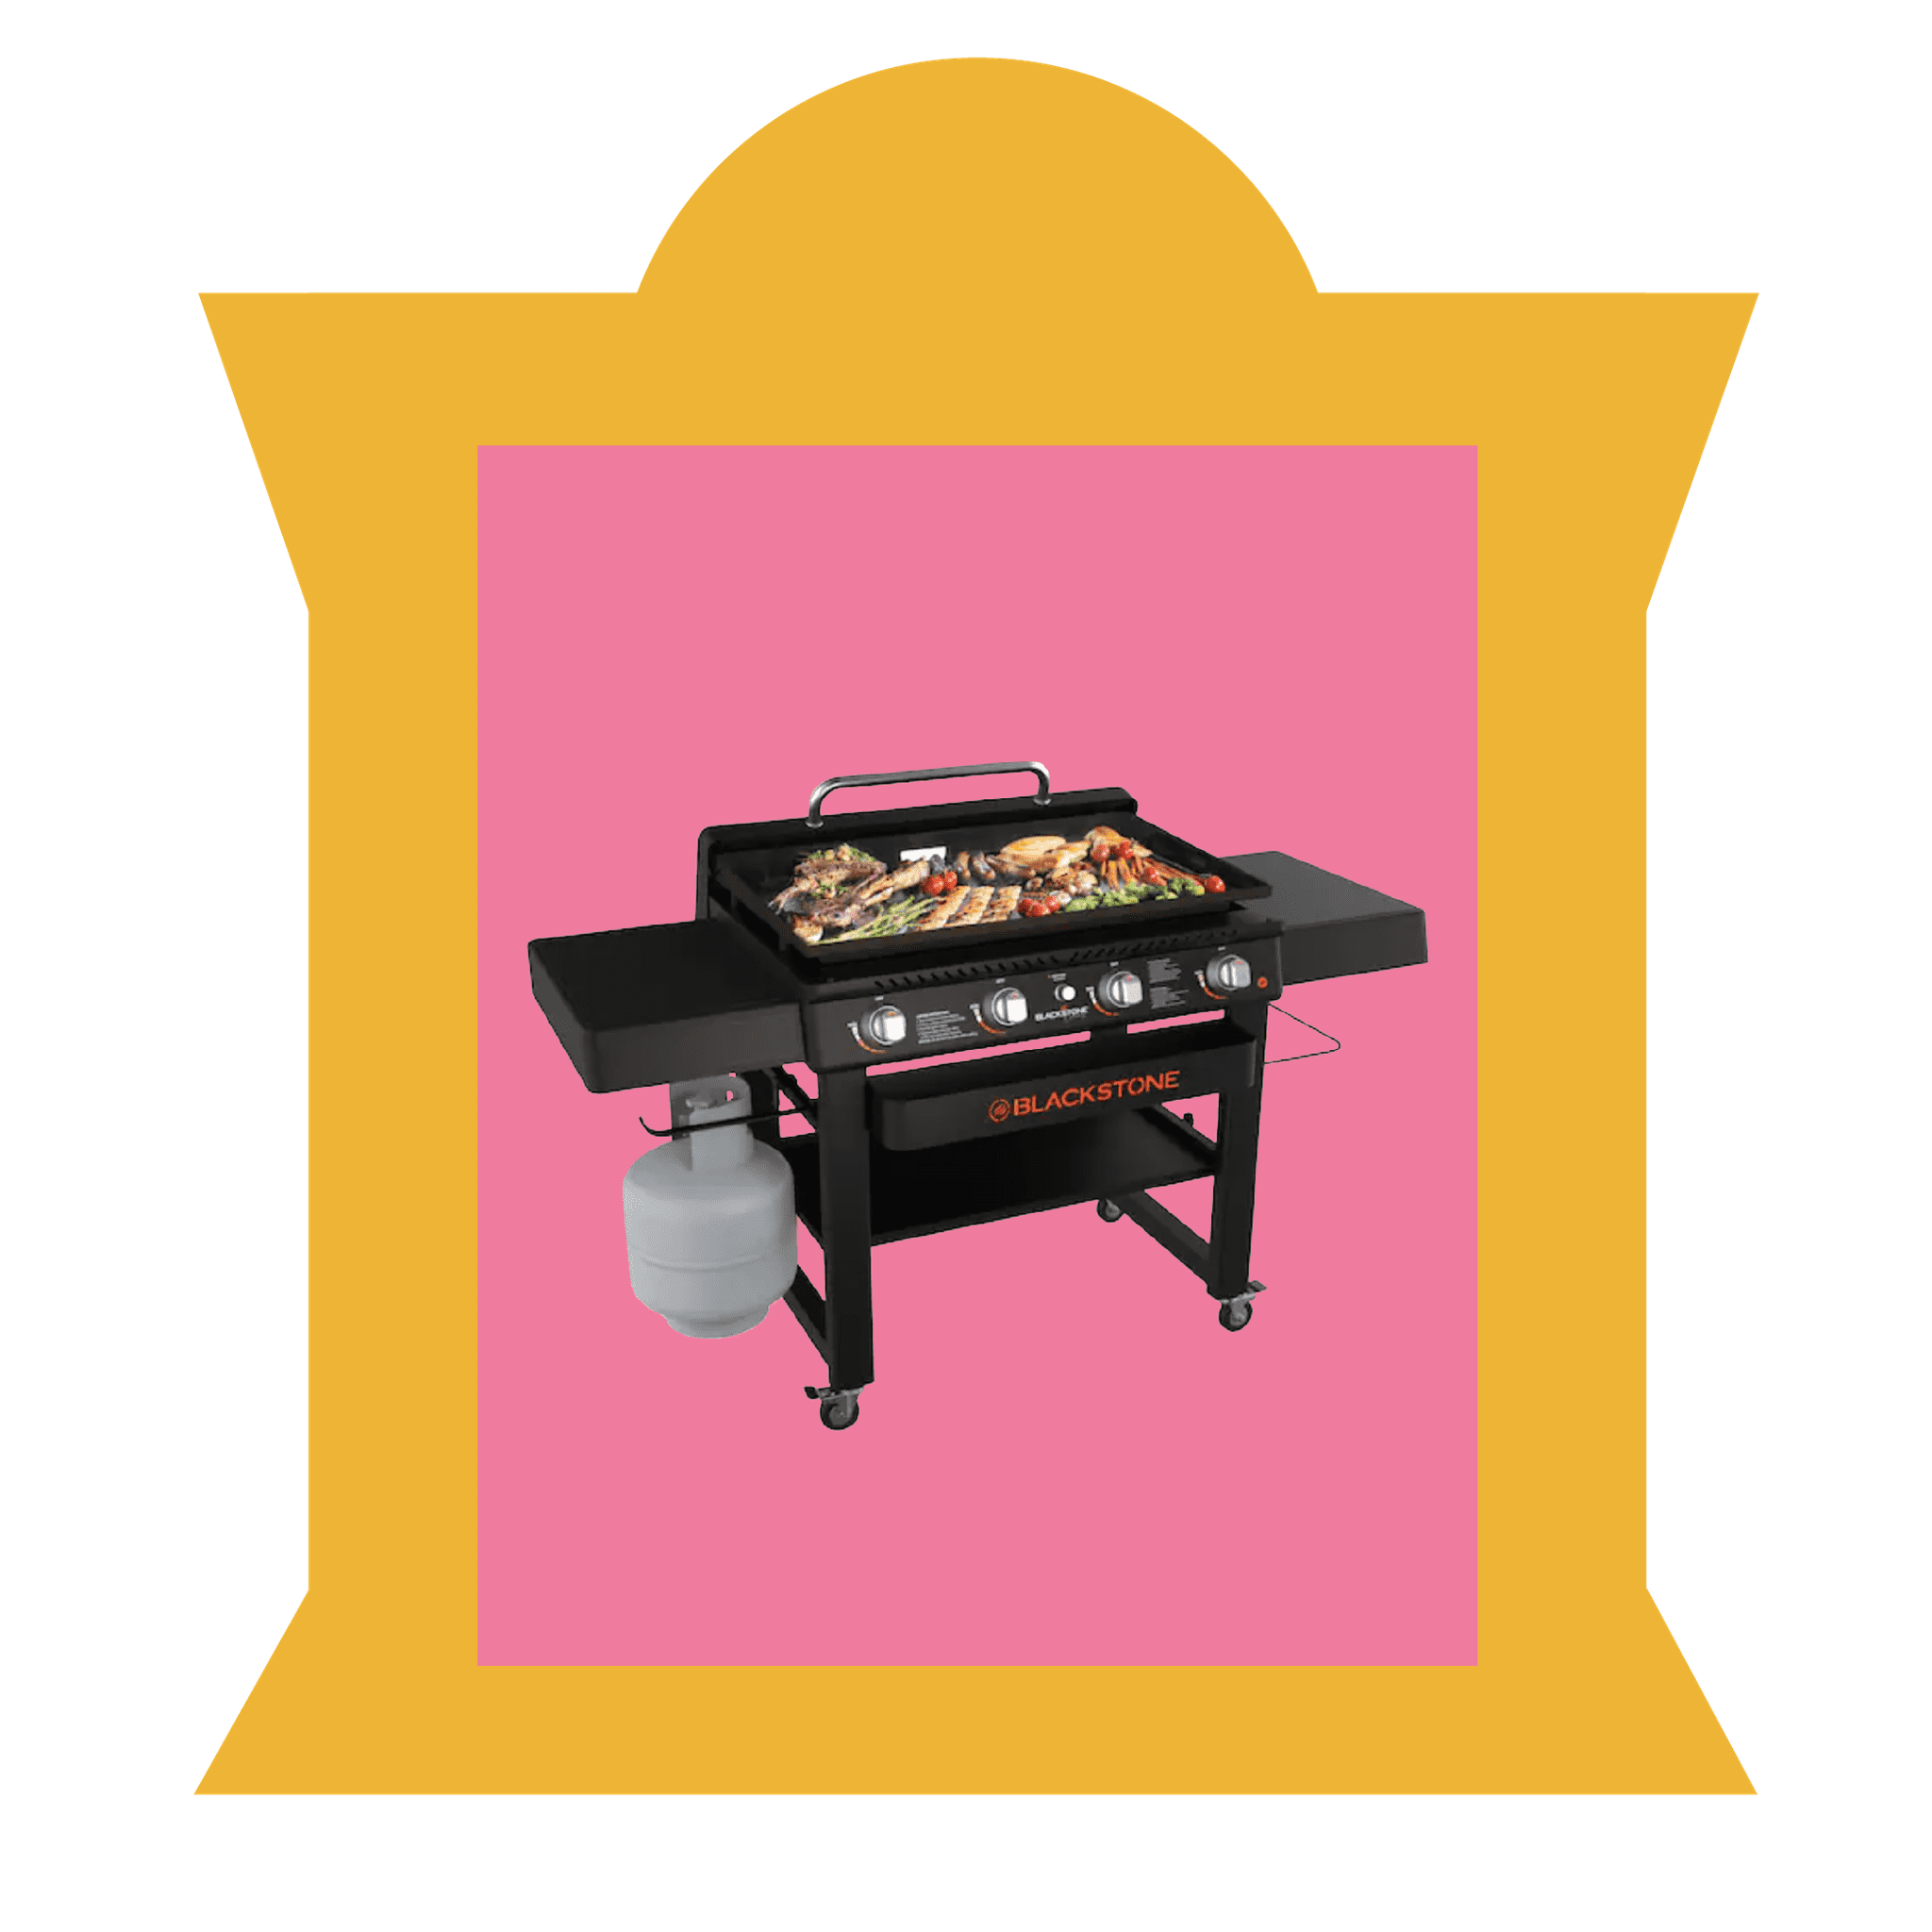 The options are endless when it comes to cooking on your Blackstone Flat Top Griddle ($399). The perfect gift for someone who has an outdoor space or deck for the first time and also enjoys entertaining, this 36-inch grill top makes it easy to cook all meals — breakfast, lunch, or dinner — in a big batch.